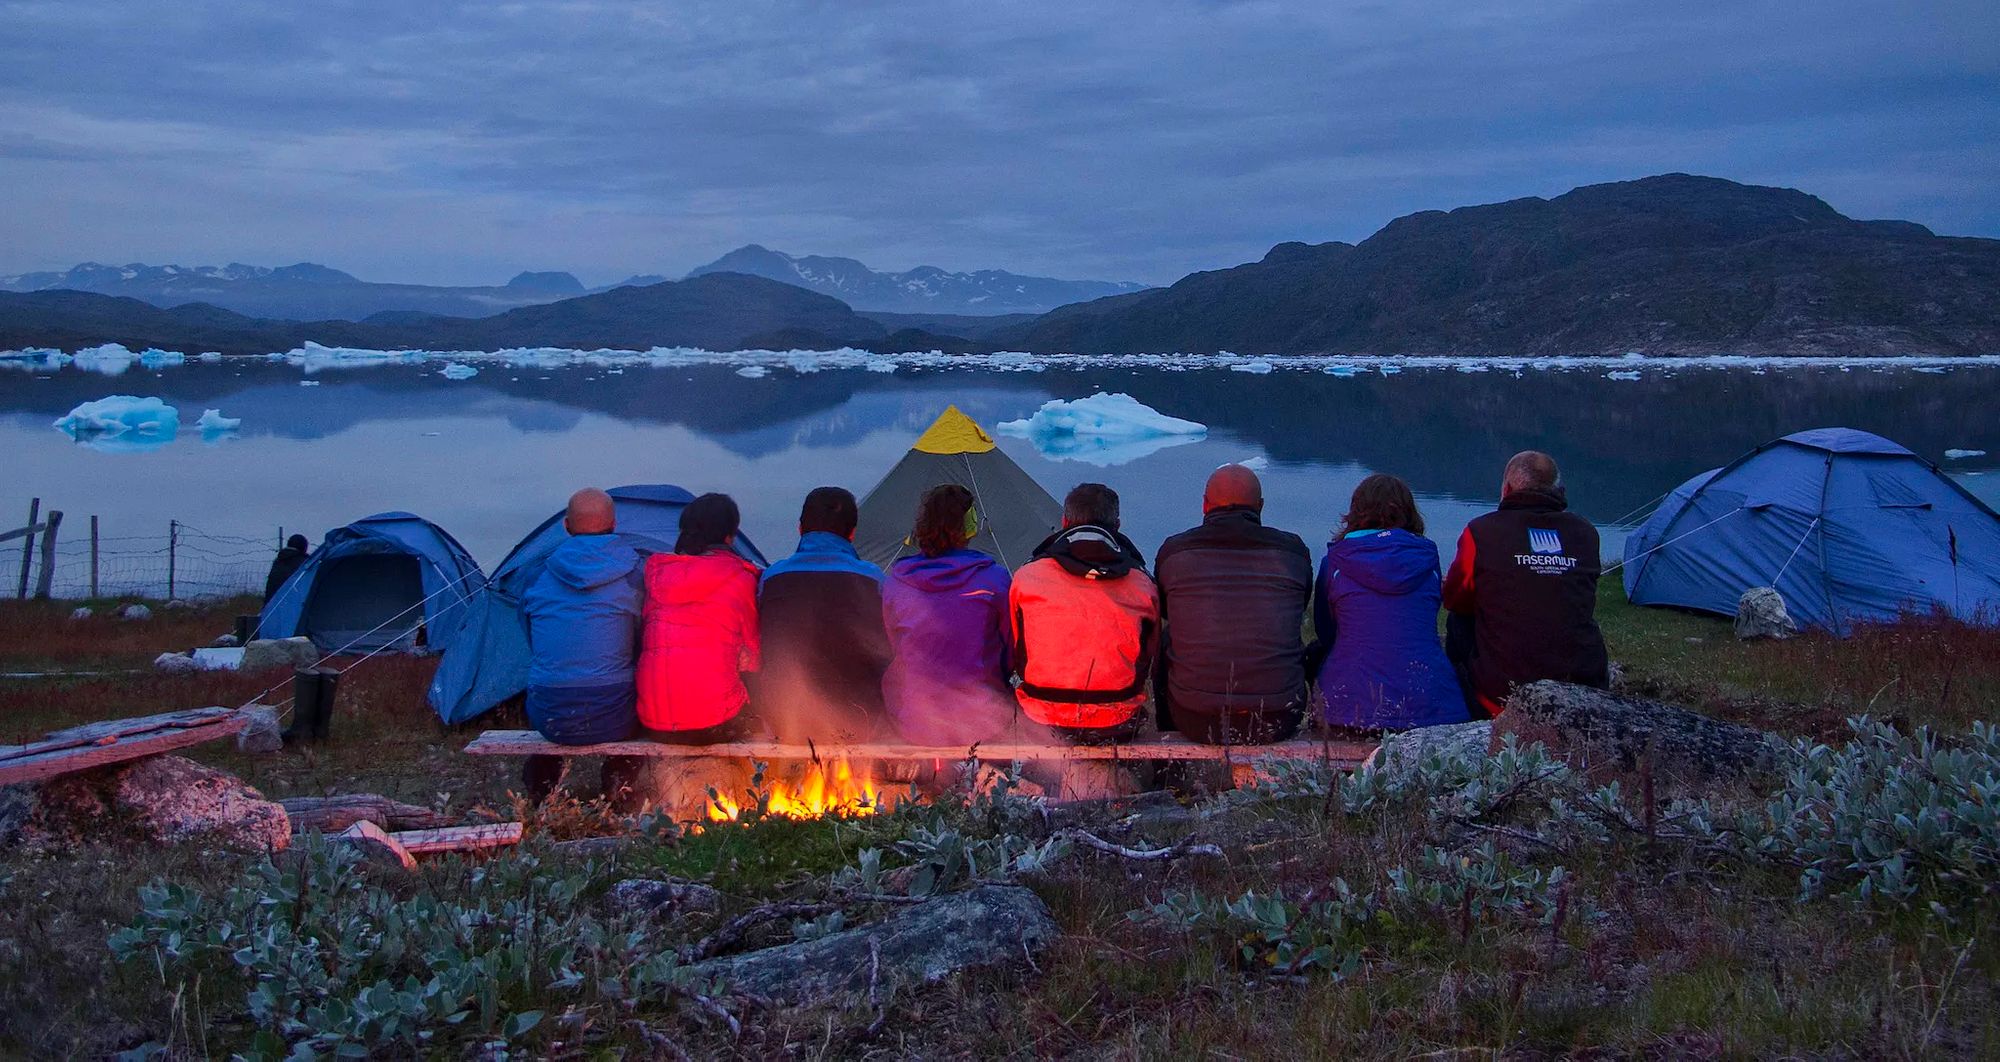 A group of people sit by a campfire at dusk, overlooking an icy fjord in Greenland.